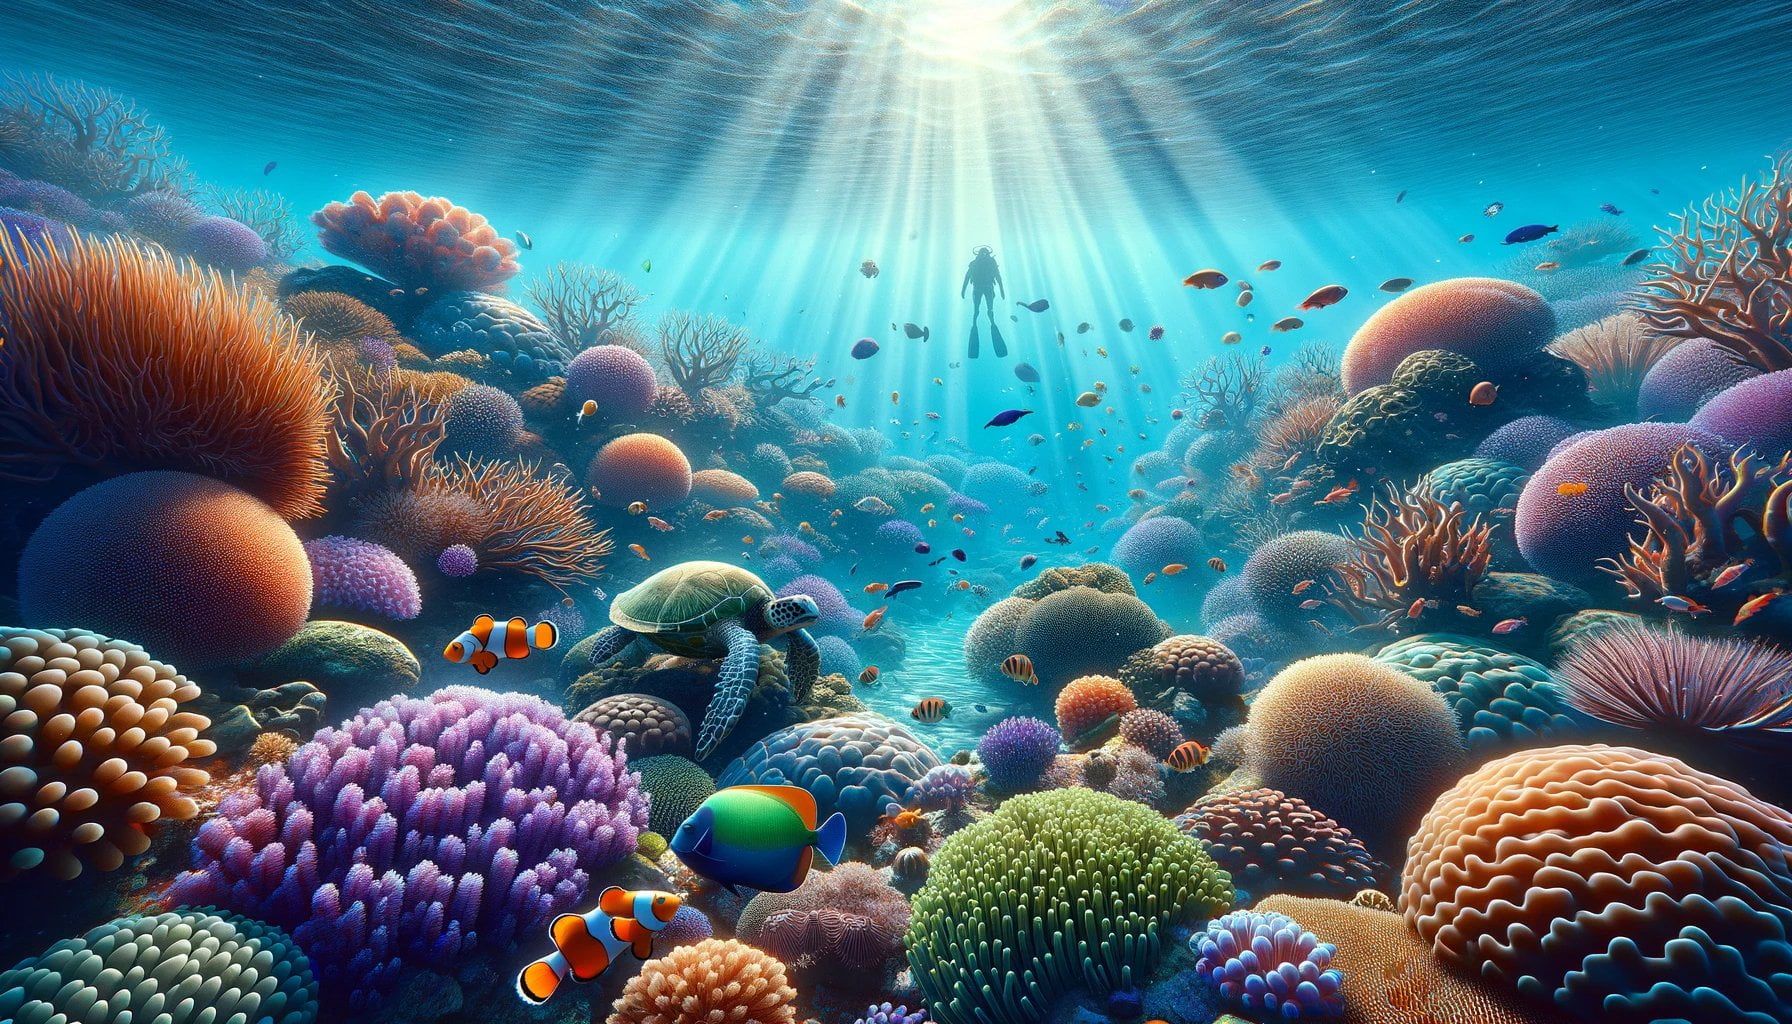 10 interesting facts about coral reefs